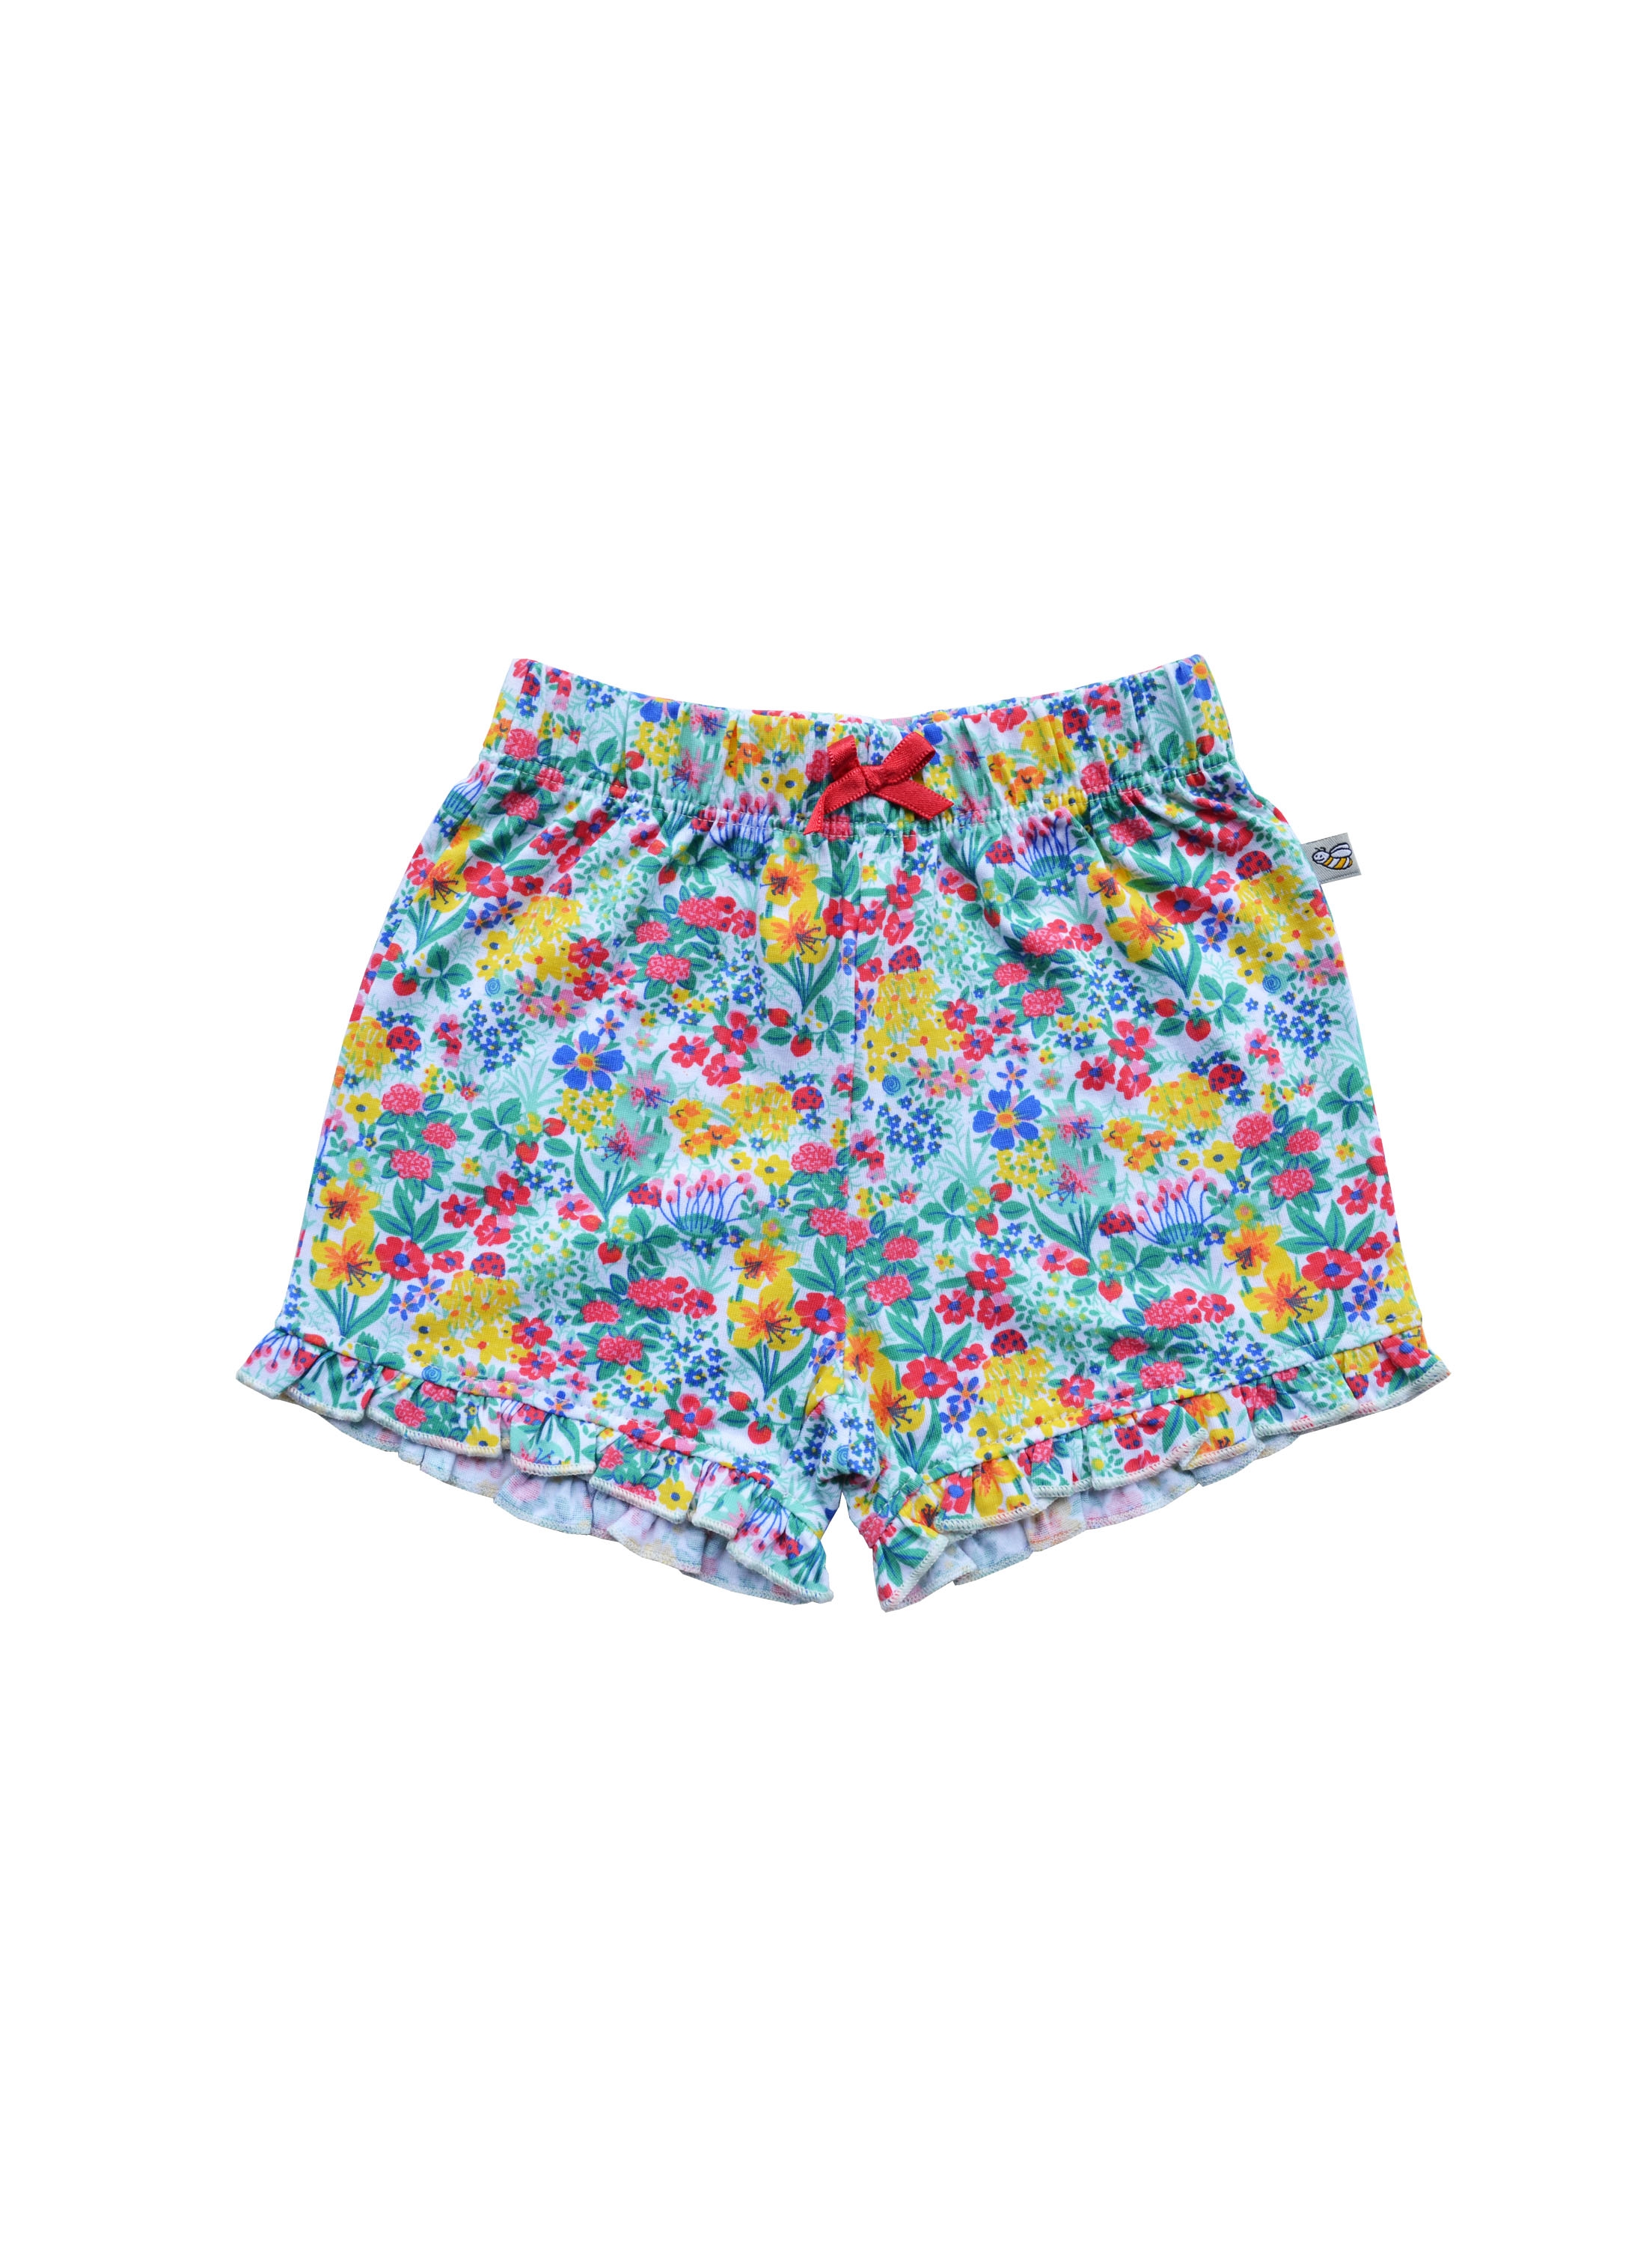 Allover Multicolored Flower Print Girls Shorts (100% Cotton Jersey)